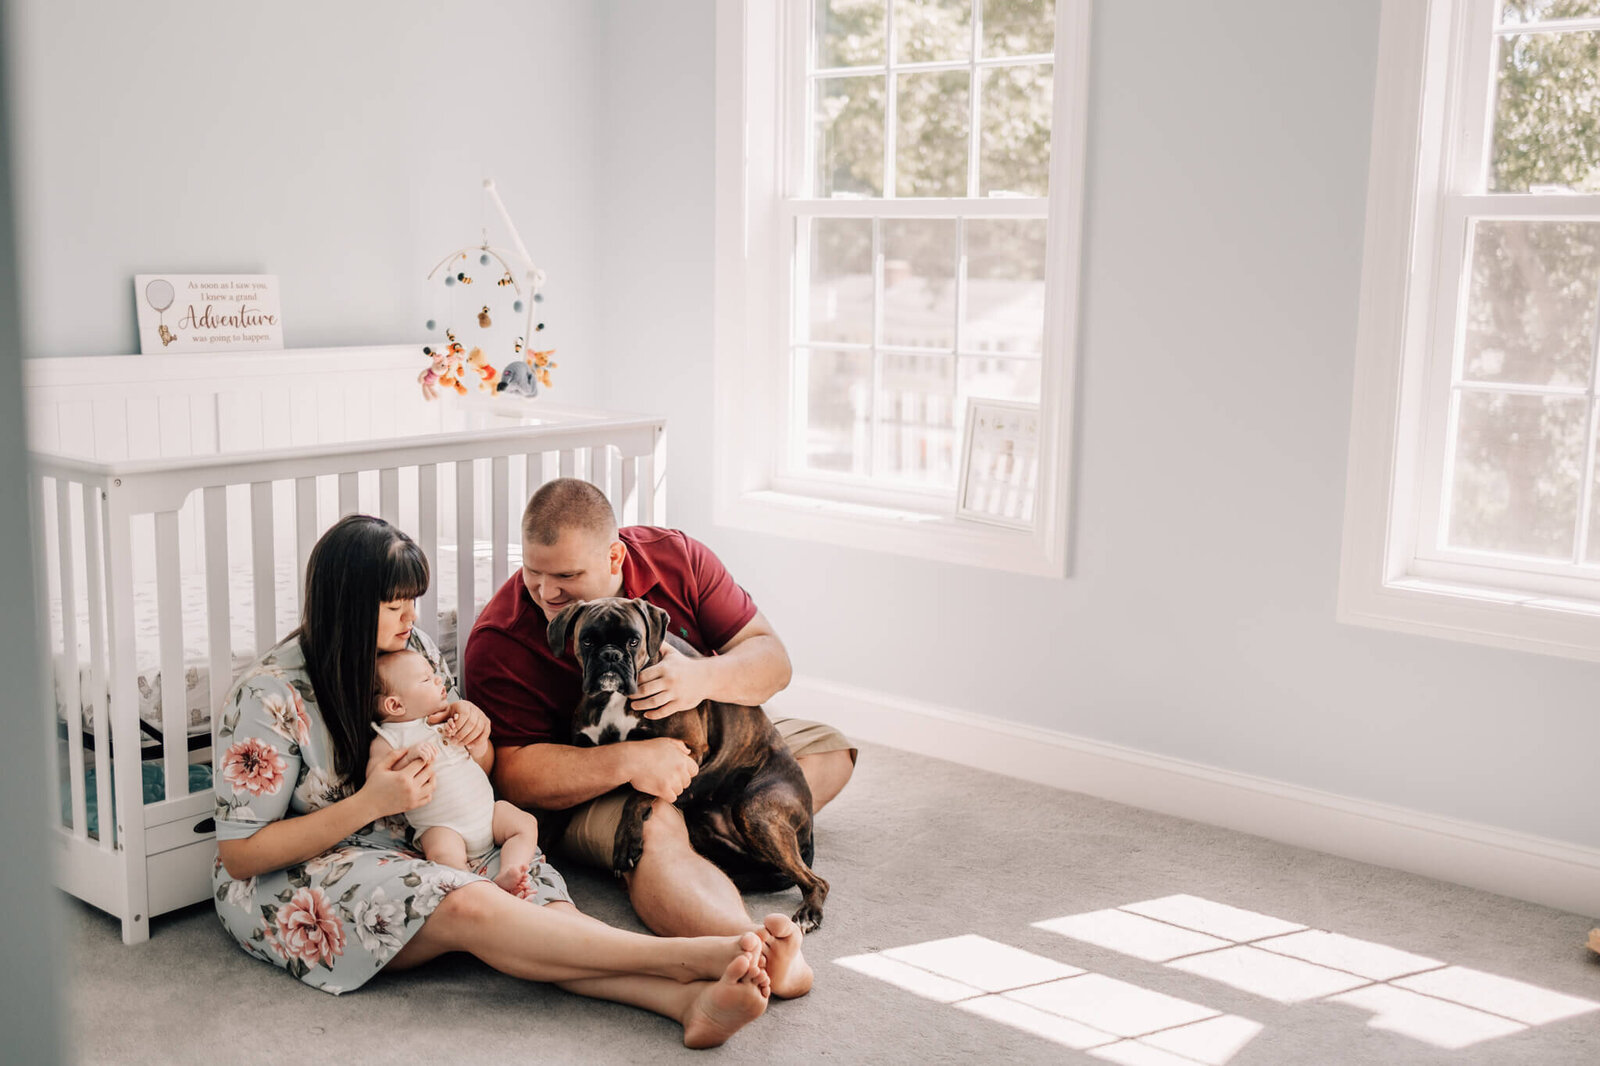 Mom, Dad, Baby, and dog in nursery sitting in front of crib